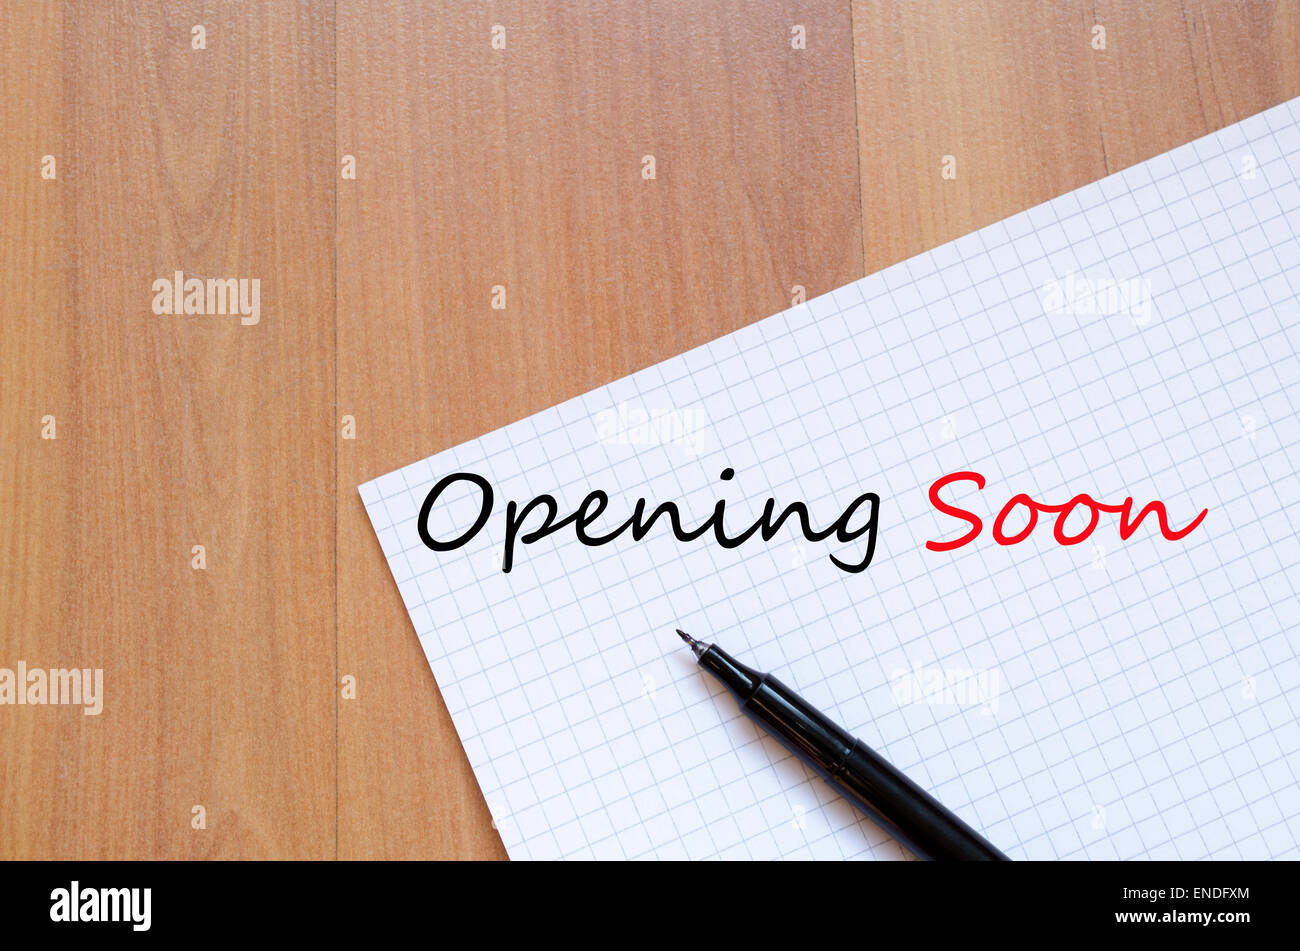 Opening Soon Concept Stock Photo